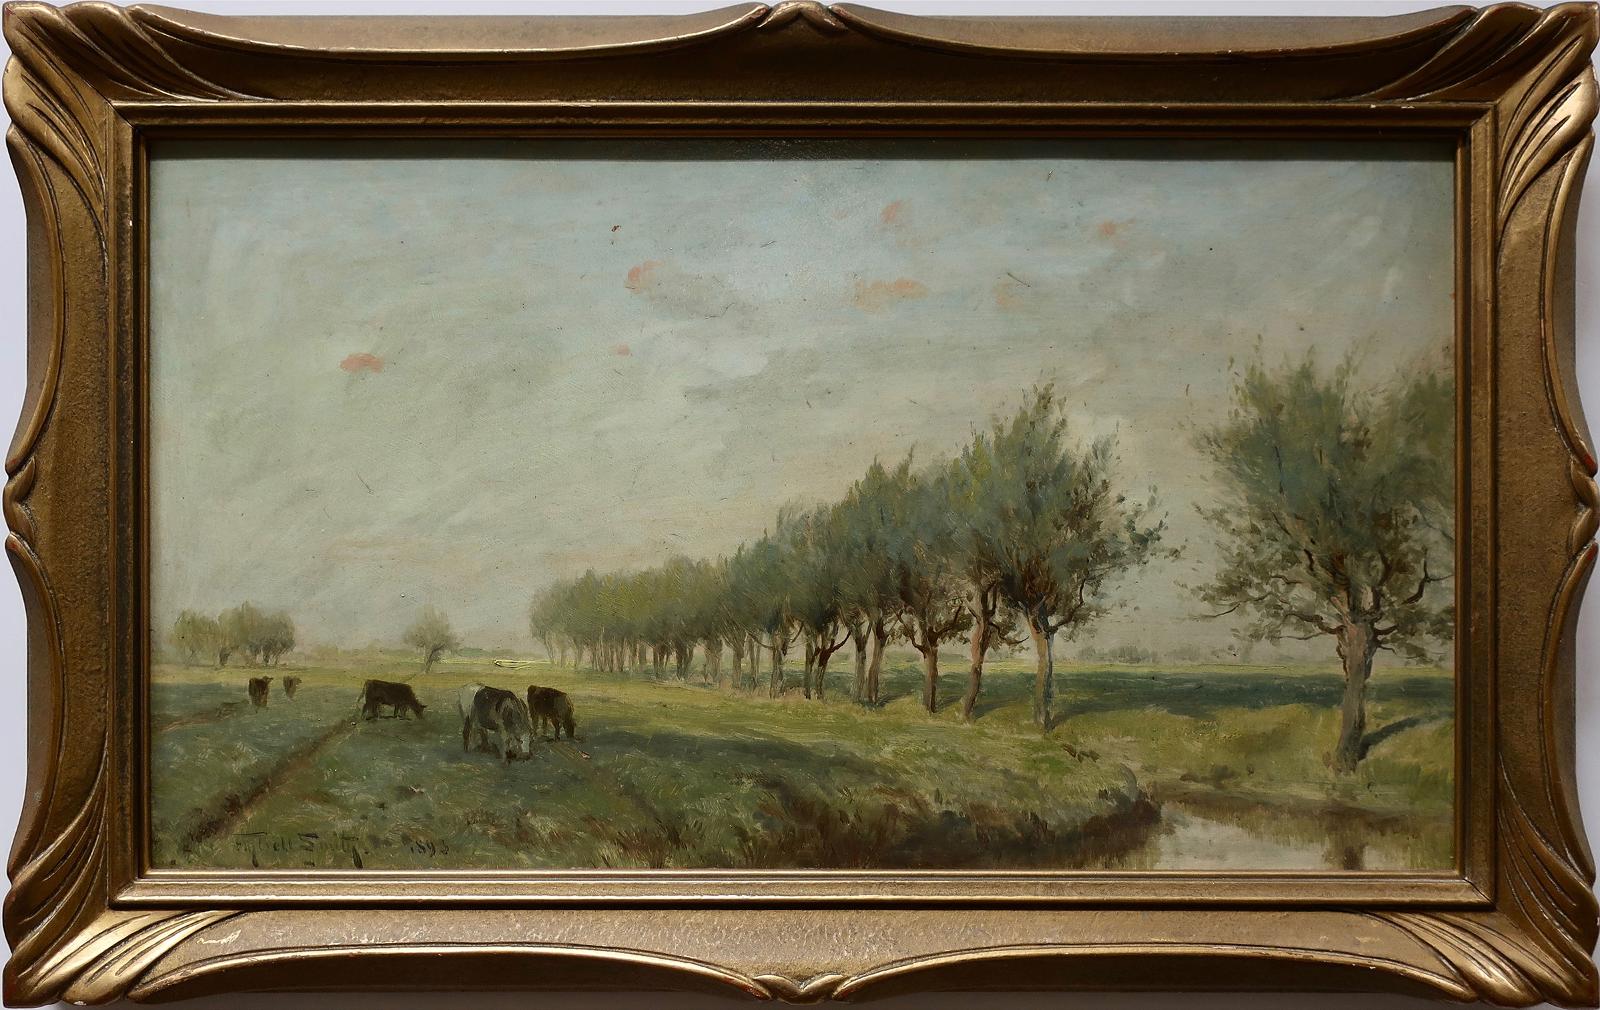 Frederic Martlett Bell-Smith (1846-1923) - Untitled (Grazing Cattle)